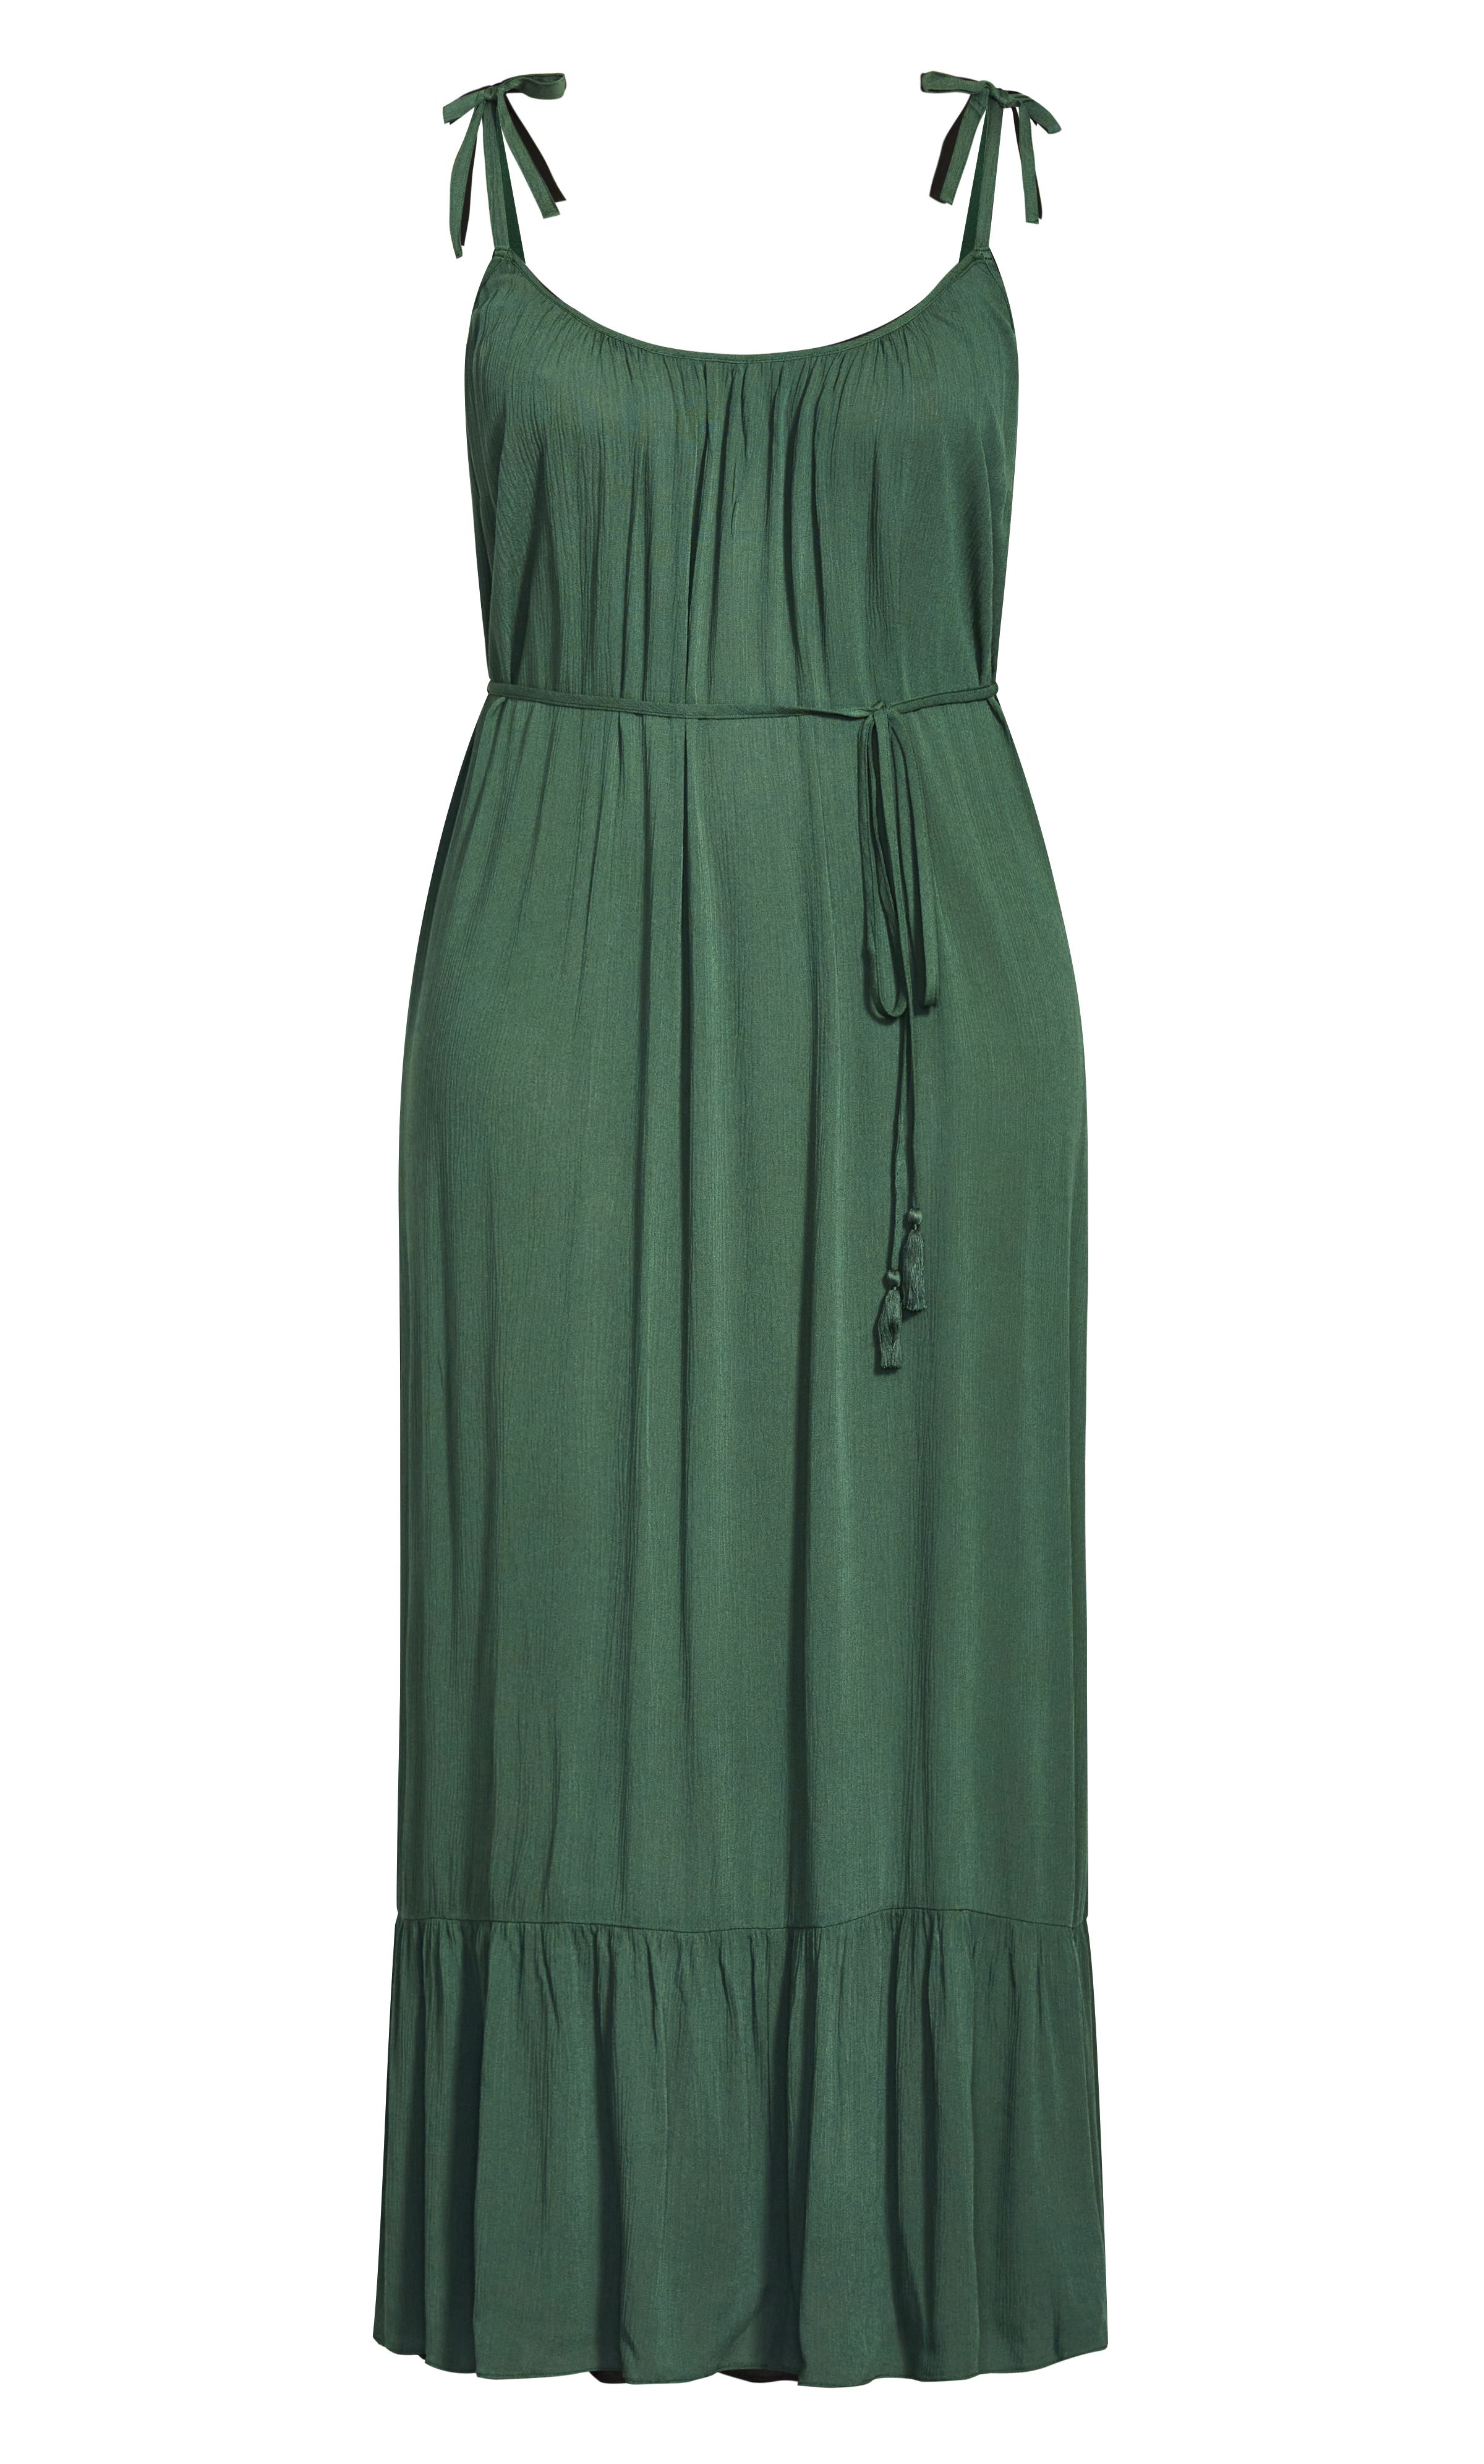 Swish and sway with elegance in the flirty Tropical Escape Maxi Dress. Doused in a flattering jungle green, with thin tied straps and a fabulously frilled hem, this floaty maxi dress is a summer must-have! Key Features Include: - Rounded neckline - Thin adjustable straps with tie feature - Removable self-tie string waist belt with tassel finishes - Pull over style - Unlined - Relaxed fit - Frilled maxi length hemline For casual weekend strolls to the shops, dress this look down with simple slides. Doll it up for sunset cocktails by adding a pair of strappy block heels.